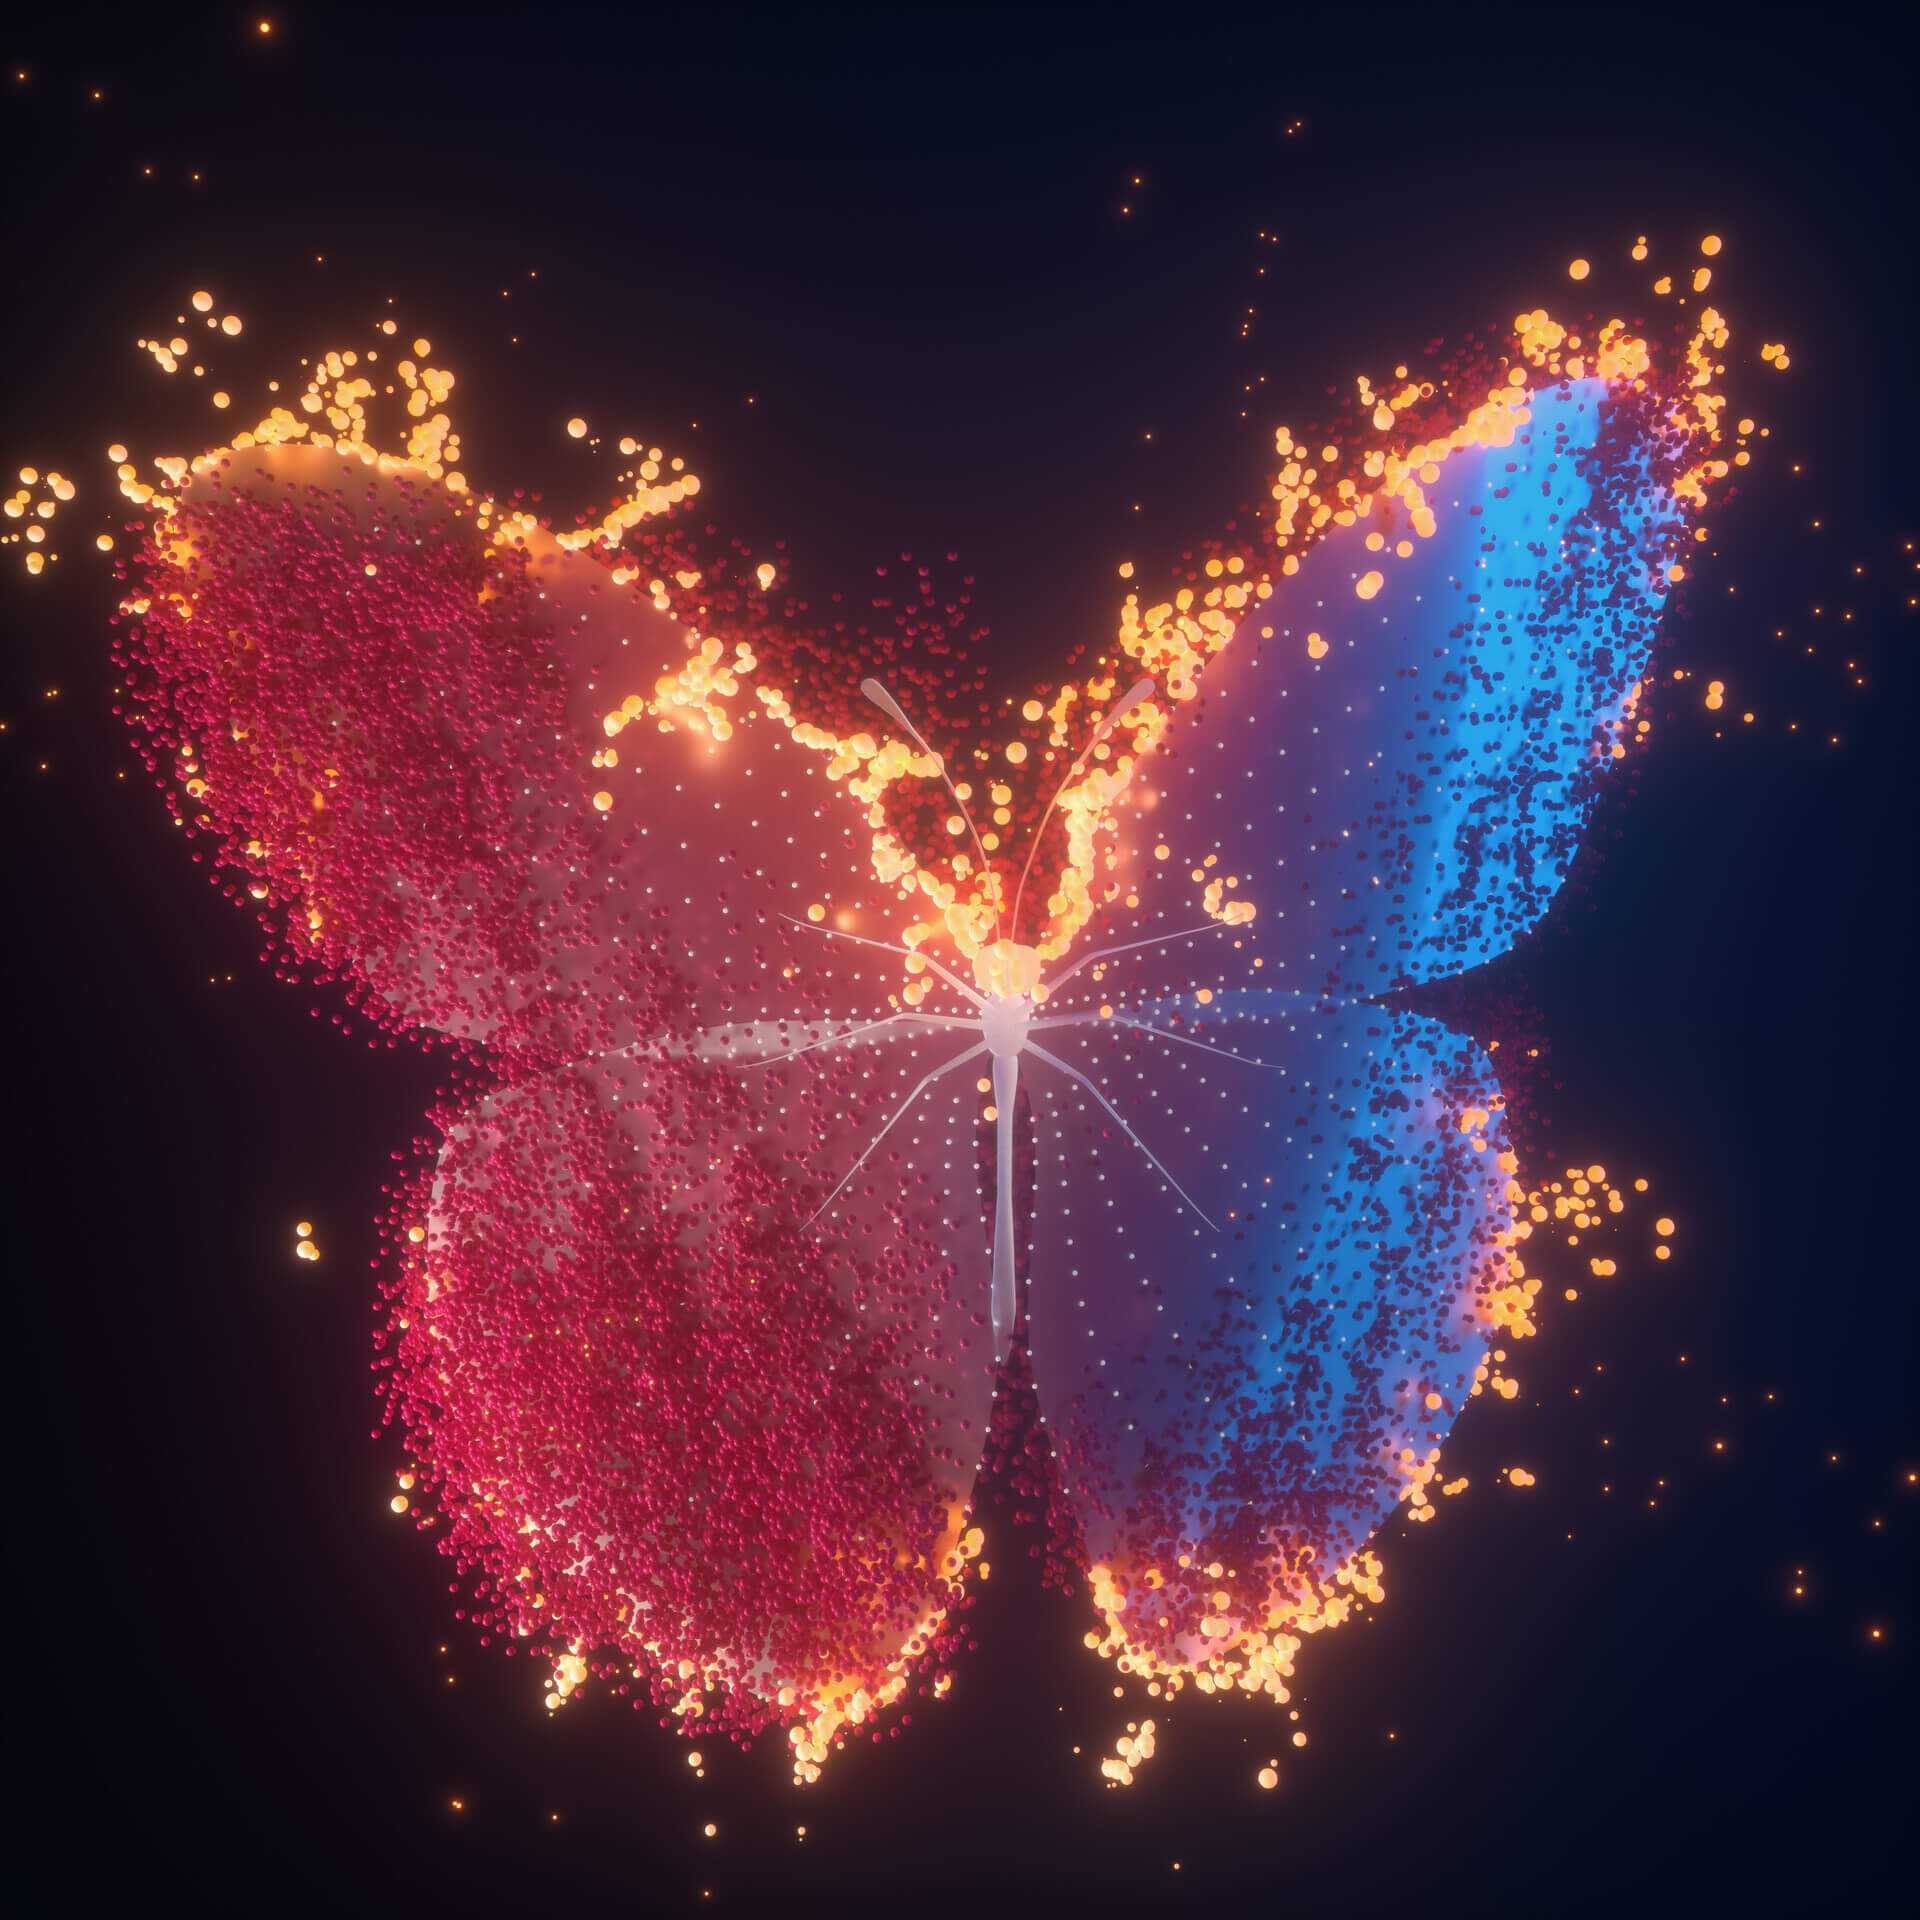 nick-pascoal-022523-butterfly-particles-master-1